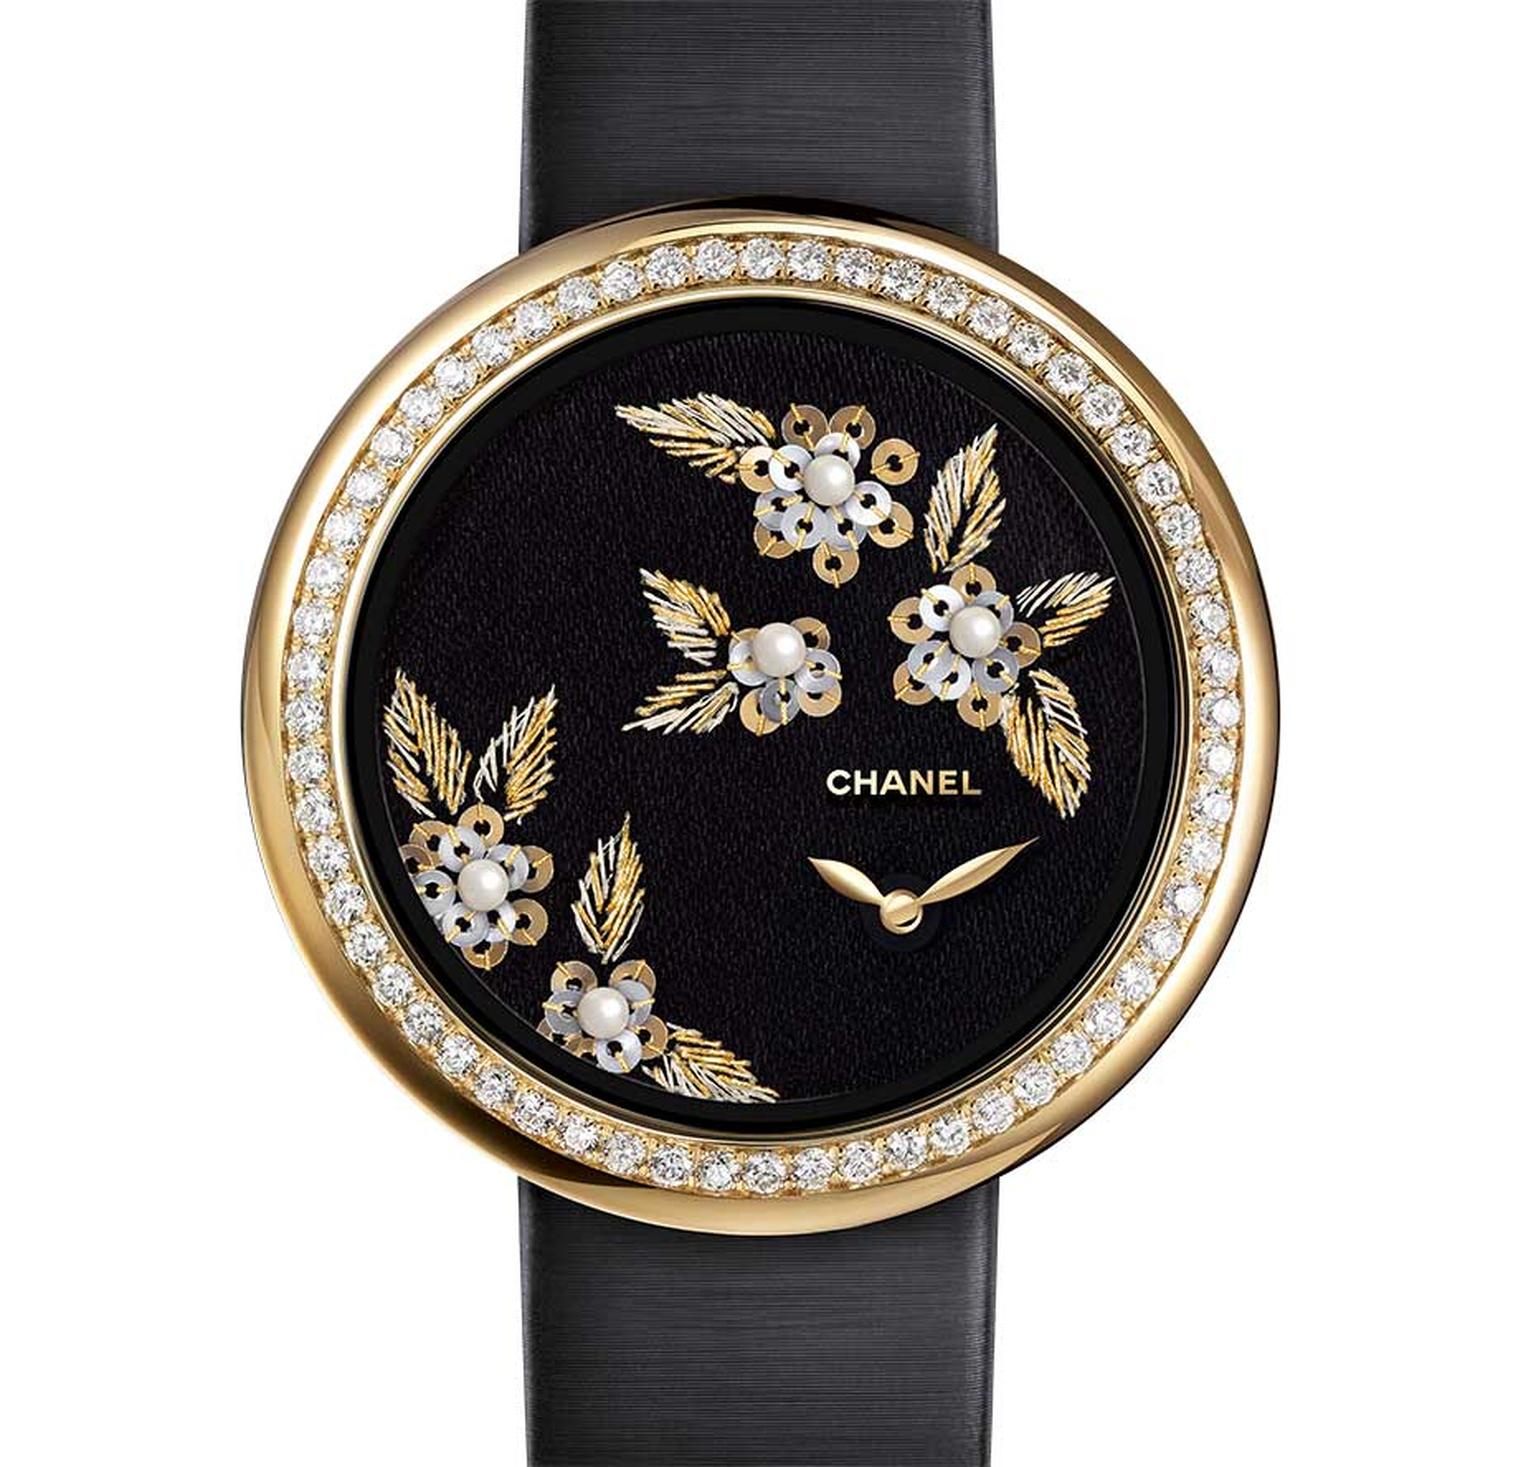 Chanel Mademoiselle Privé Camellia Brodé Lesage watch, hand embroidered with gold and green silk thread, thread, yellow and white hold gold sequins and natural pearls